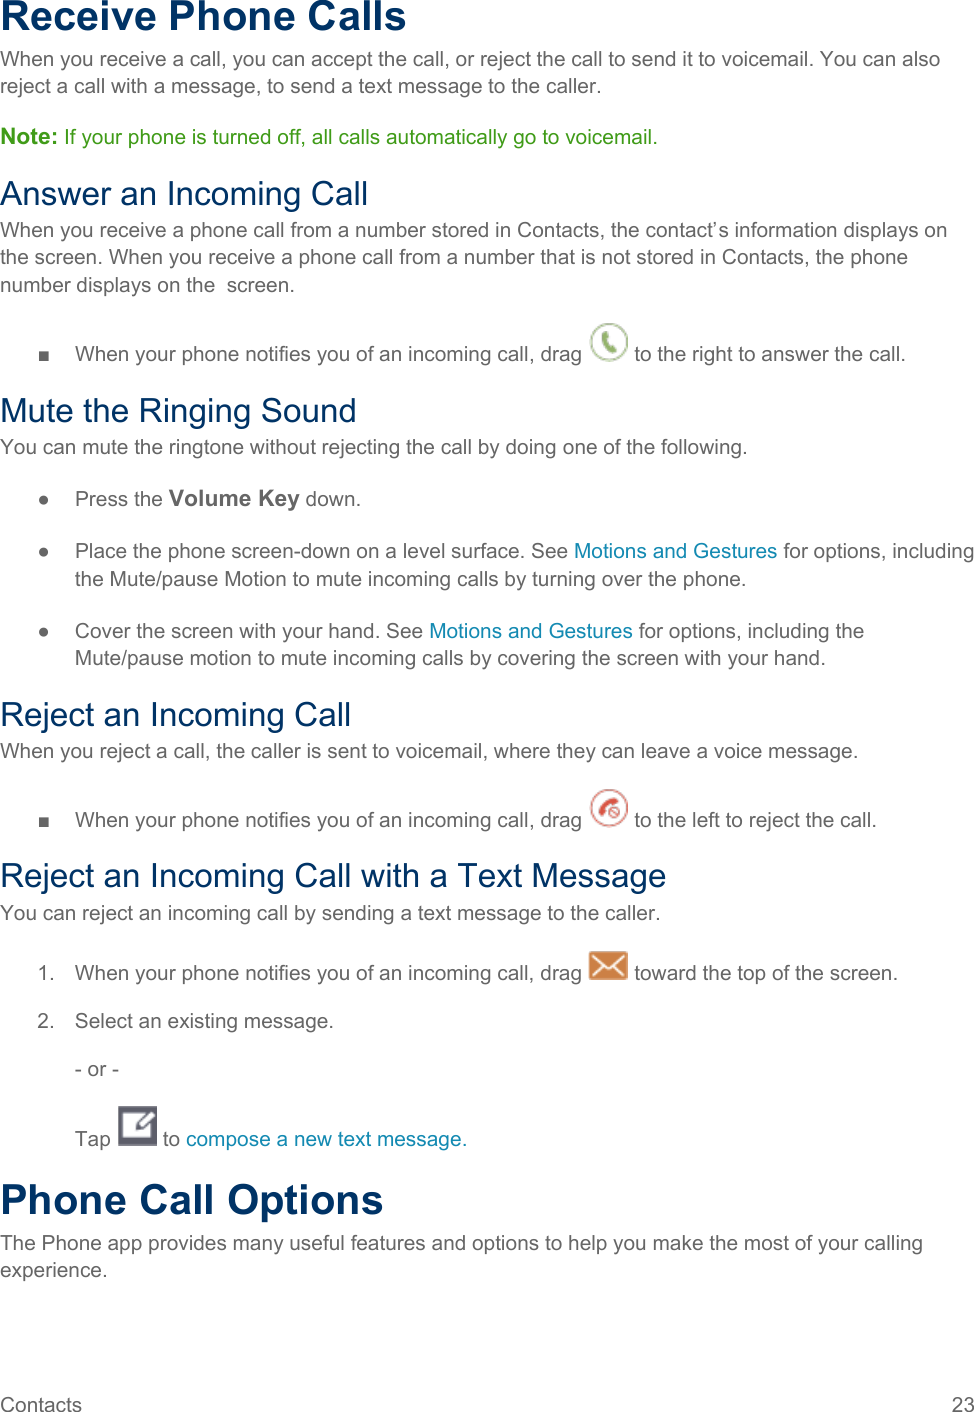  Receive Phone Calls When you receive a call, you can accept the call, or reject the call to send it to voicemail. You can also reject a call with a message, to send a text message to the caller. Note: If your phone is turned off, all calls automatically go to voicemail. Answer an Incoming Call When you receive a phone call from a number stored in Contacts, the contact’s information displays on the screen. When you receive a phone call from a number that is not stored in Contacts, the phone number displays on the  screen. ■  When your phone notifies you of an incoming call, drag   to the right to answer the call. Mute the Ringing Sound You can mute the ringtone without rejecting the call by doing one of the following. ● Press the Volume Key down. ● Place the phone screen-down on a level surface. See Motions and Gestures for options, including the Mute/pause Motion to mute incoming calls by turning over the phone. ● Cover the screen with your hand. See Motions and Gestures for options, including the Mute/pause motion to mute incoming calls by covering the screen with your hand. Reject an Incoming Call When you reject a call, the caller is sent to voicemail, where they can leave a voice message. ■  When your phone notifies you of an incoming call, drag   to the left to reject the call. Reject an Incoming Call with a Text Message You can reject an incoming call by sending a text message to the caller. 1.  When your phone notifies you of an incoming call, drag   toward the top of the screen. 2. Select an existing message. - or - Tap   to compose a new text message.  Phone Call Options The Phone app provides many useful features and options to help you make the most of your calling experience. Contacts 23   